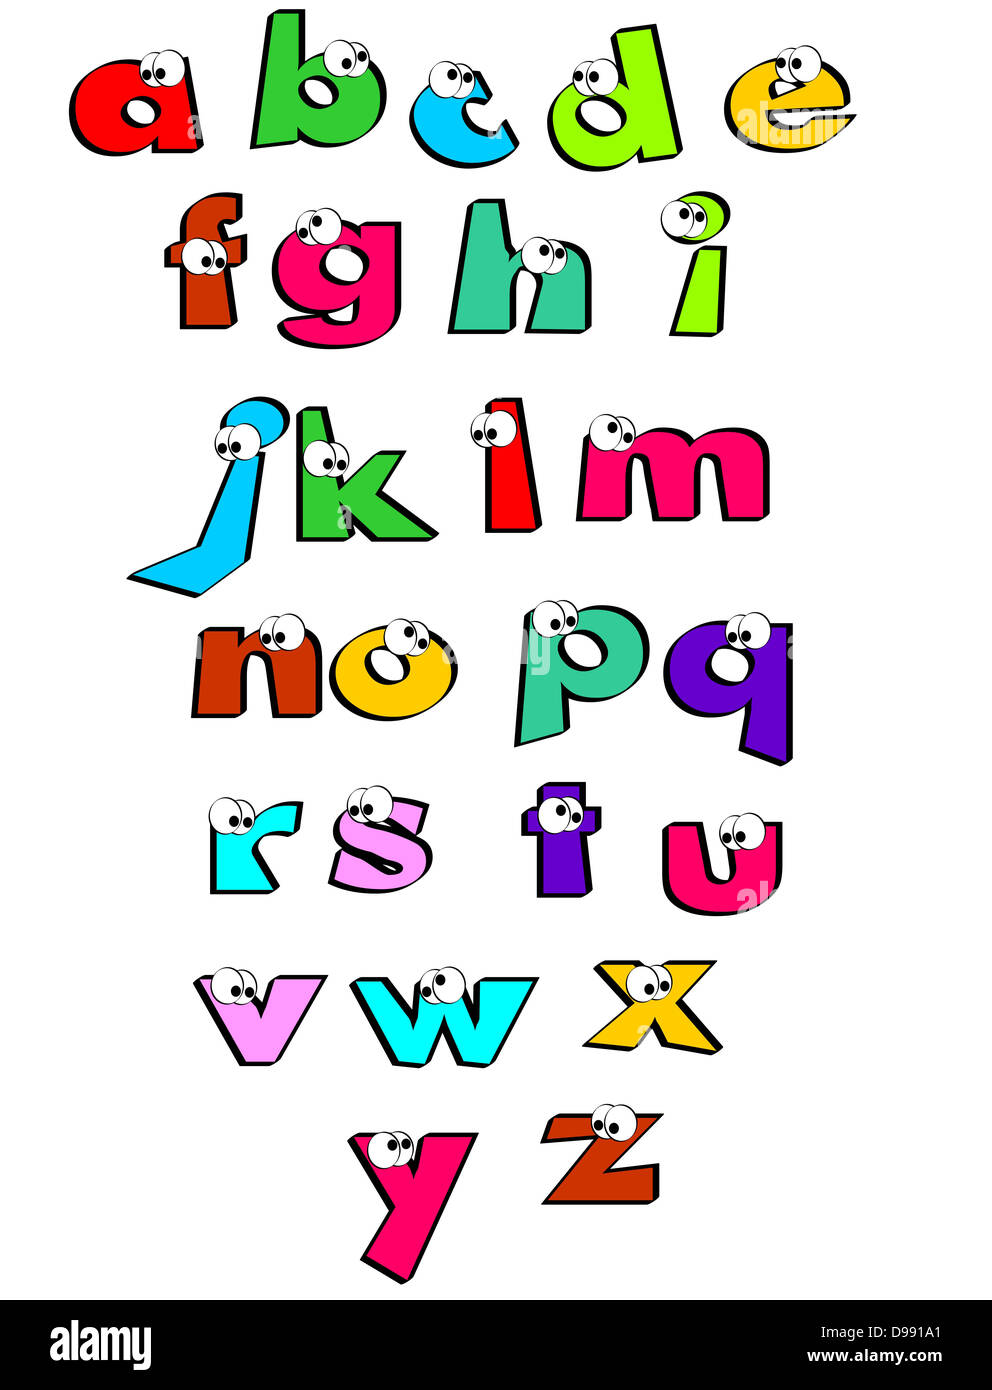 Funny alphabet letters with eyes. Alphabet for children learning their first letters. Poster for the school. Stock Photo